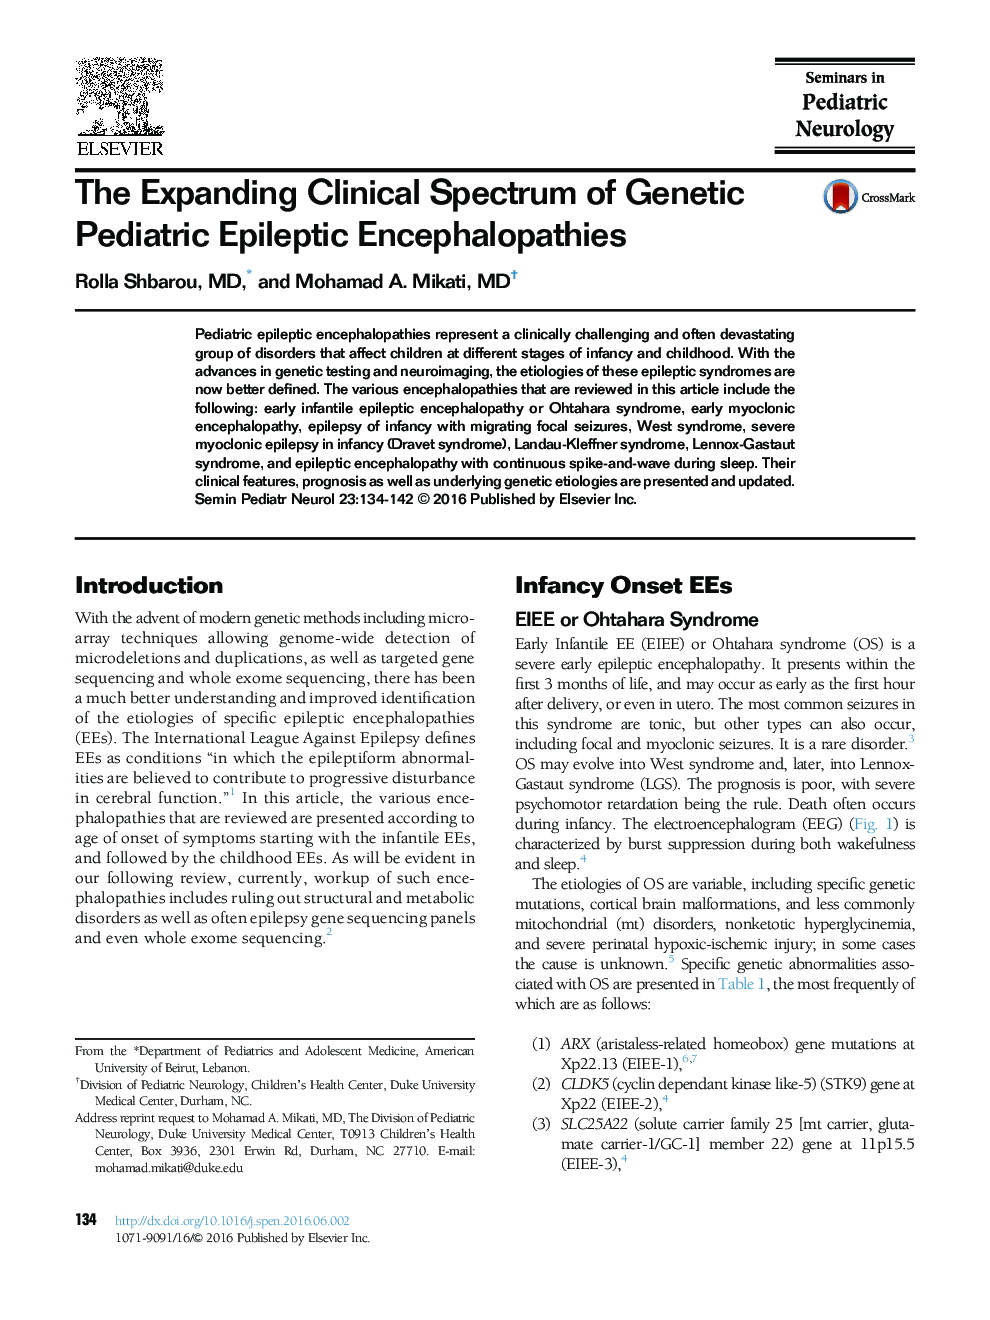 The Expanding Clinical Spectrum of Genetic Pediatric Epileptic Encephalopathies